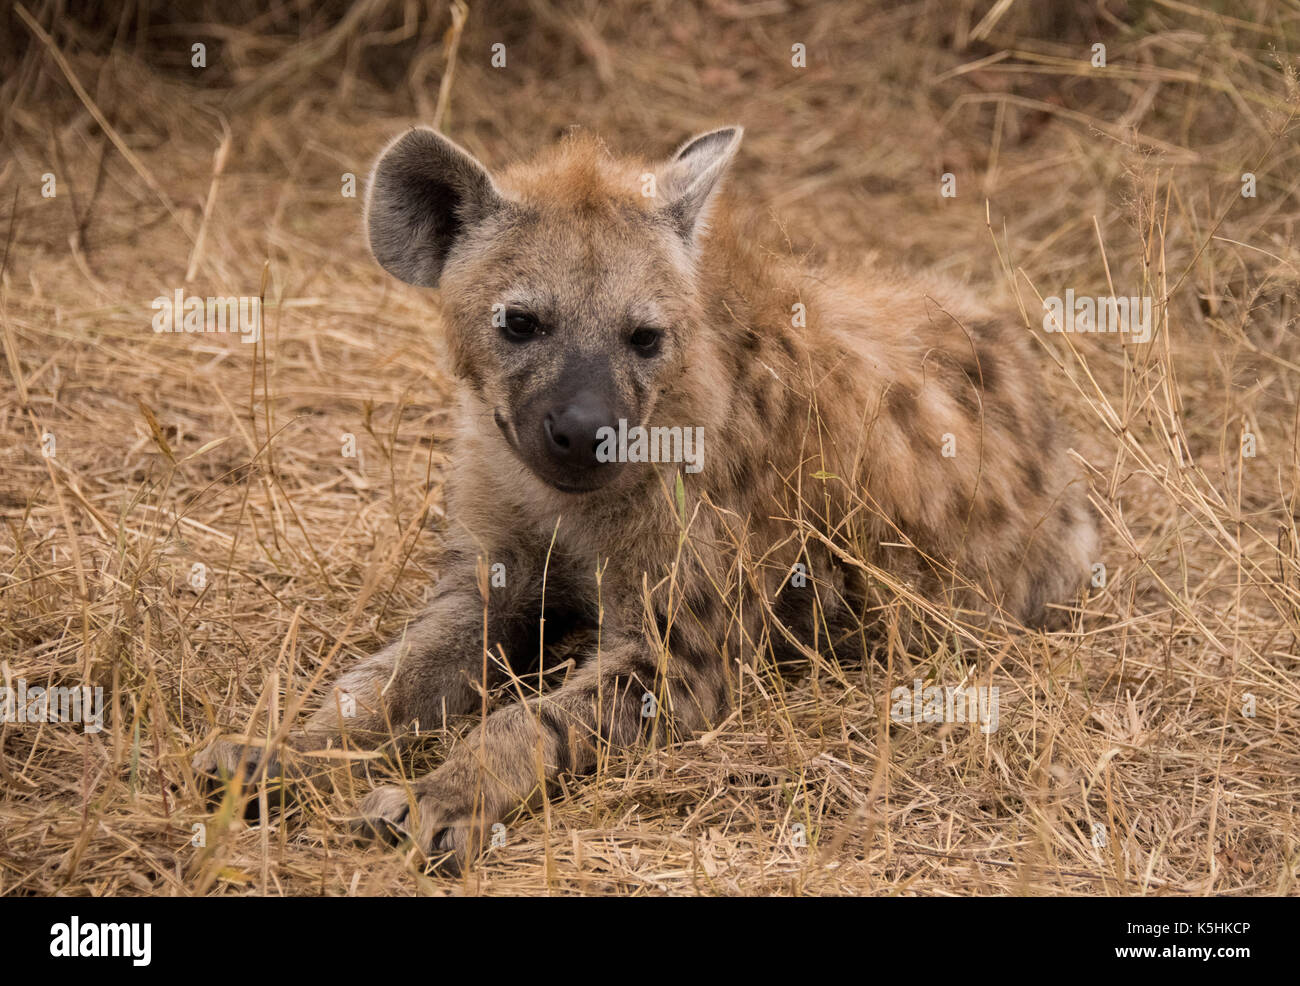 Spotted Hyena, Kruger National Park, South Africa Stock Photo